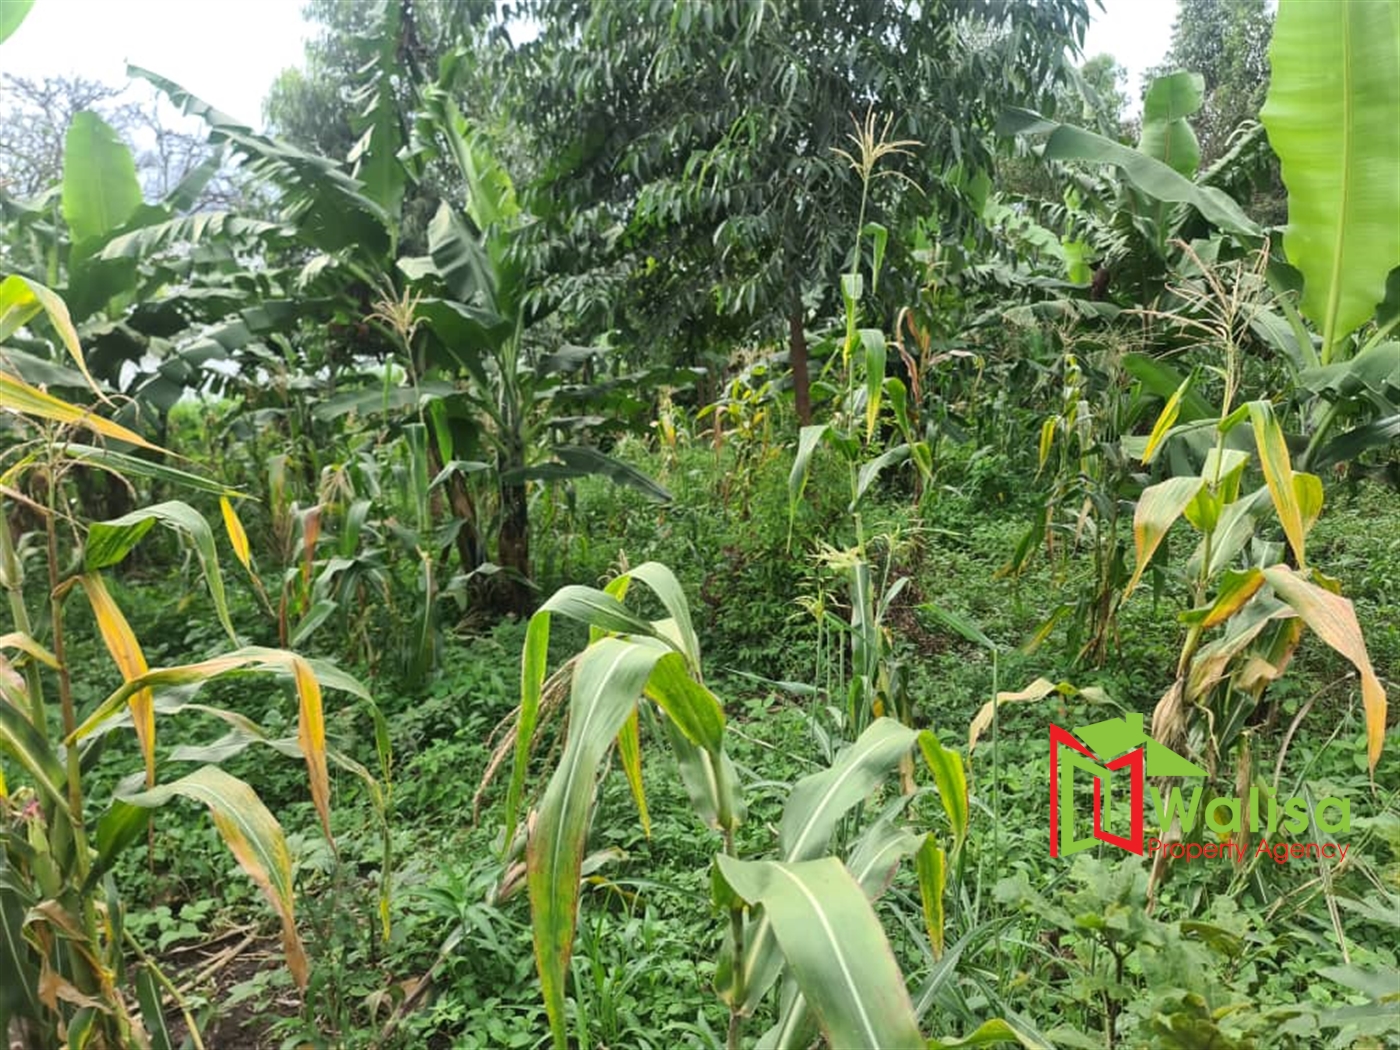 Agricultural Land for sale in Naijja Buyikwe